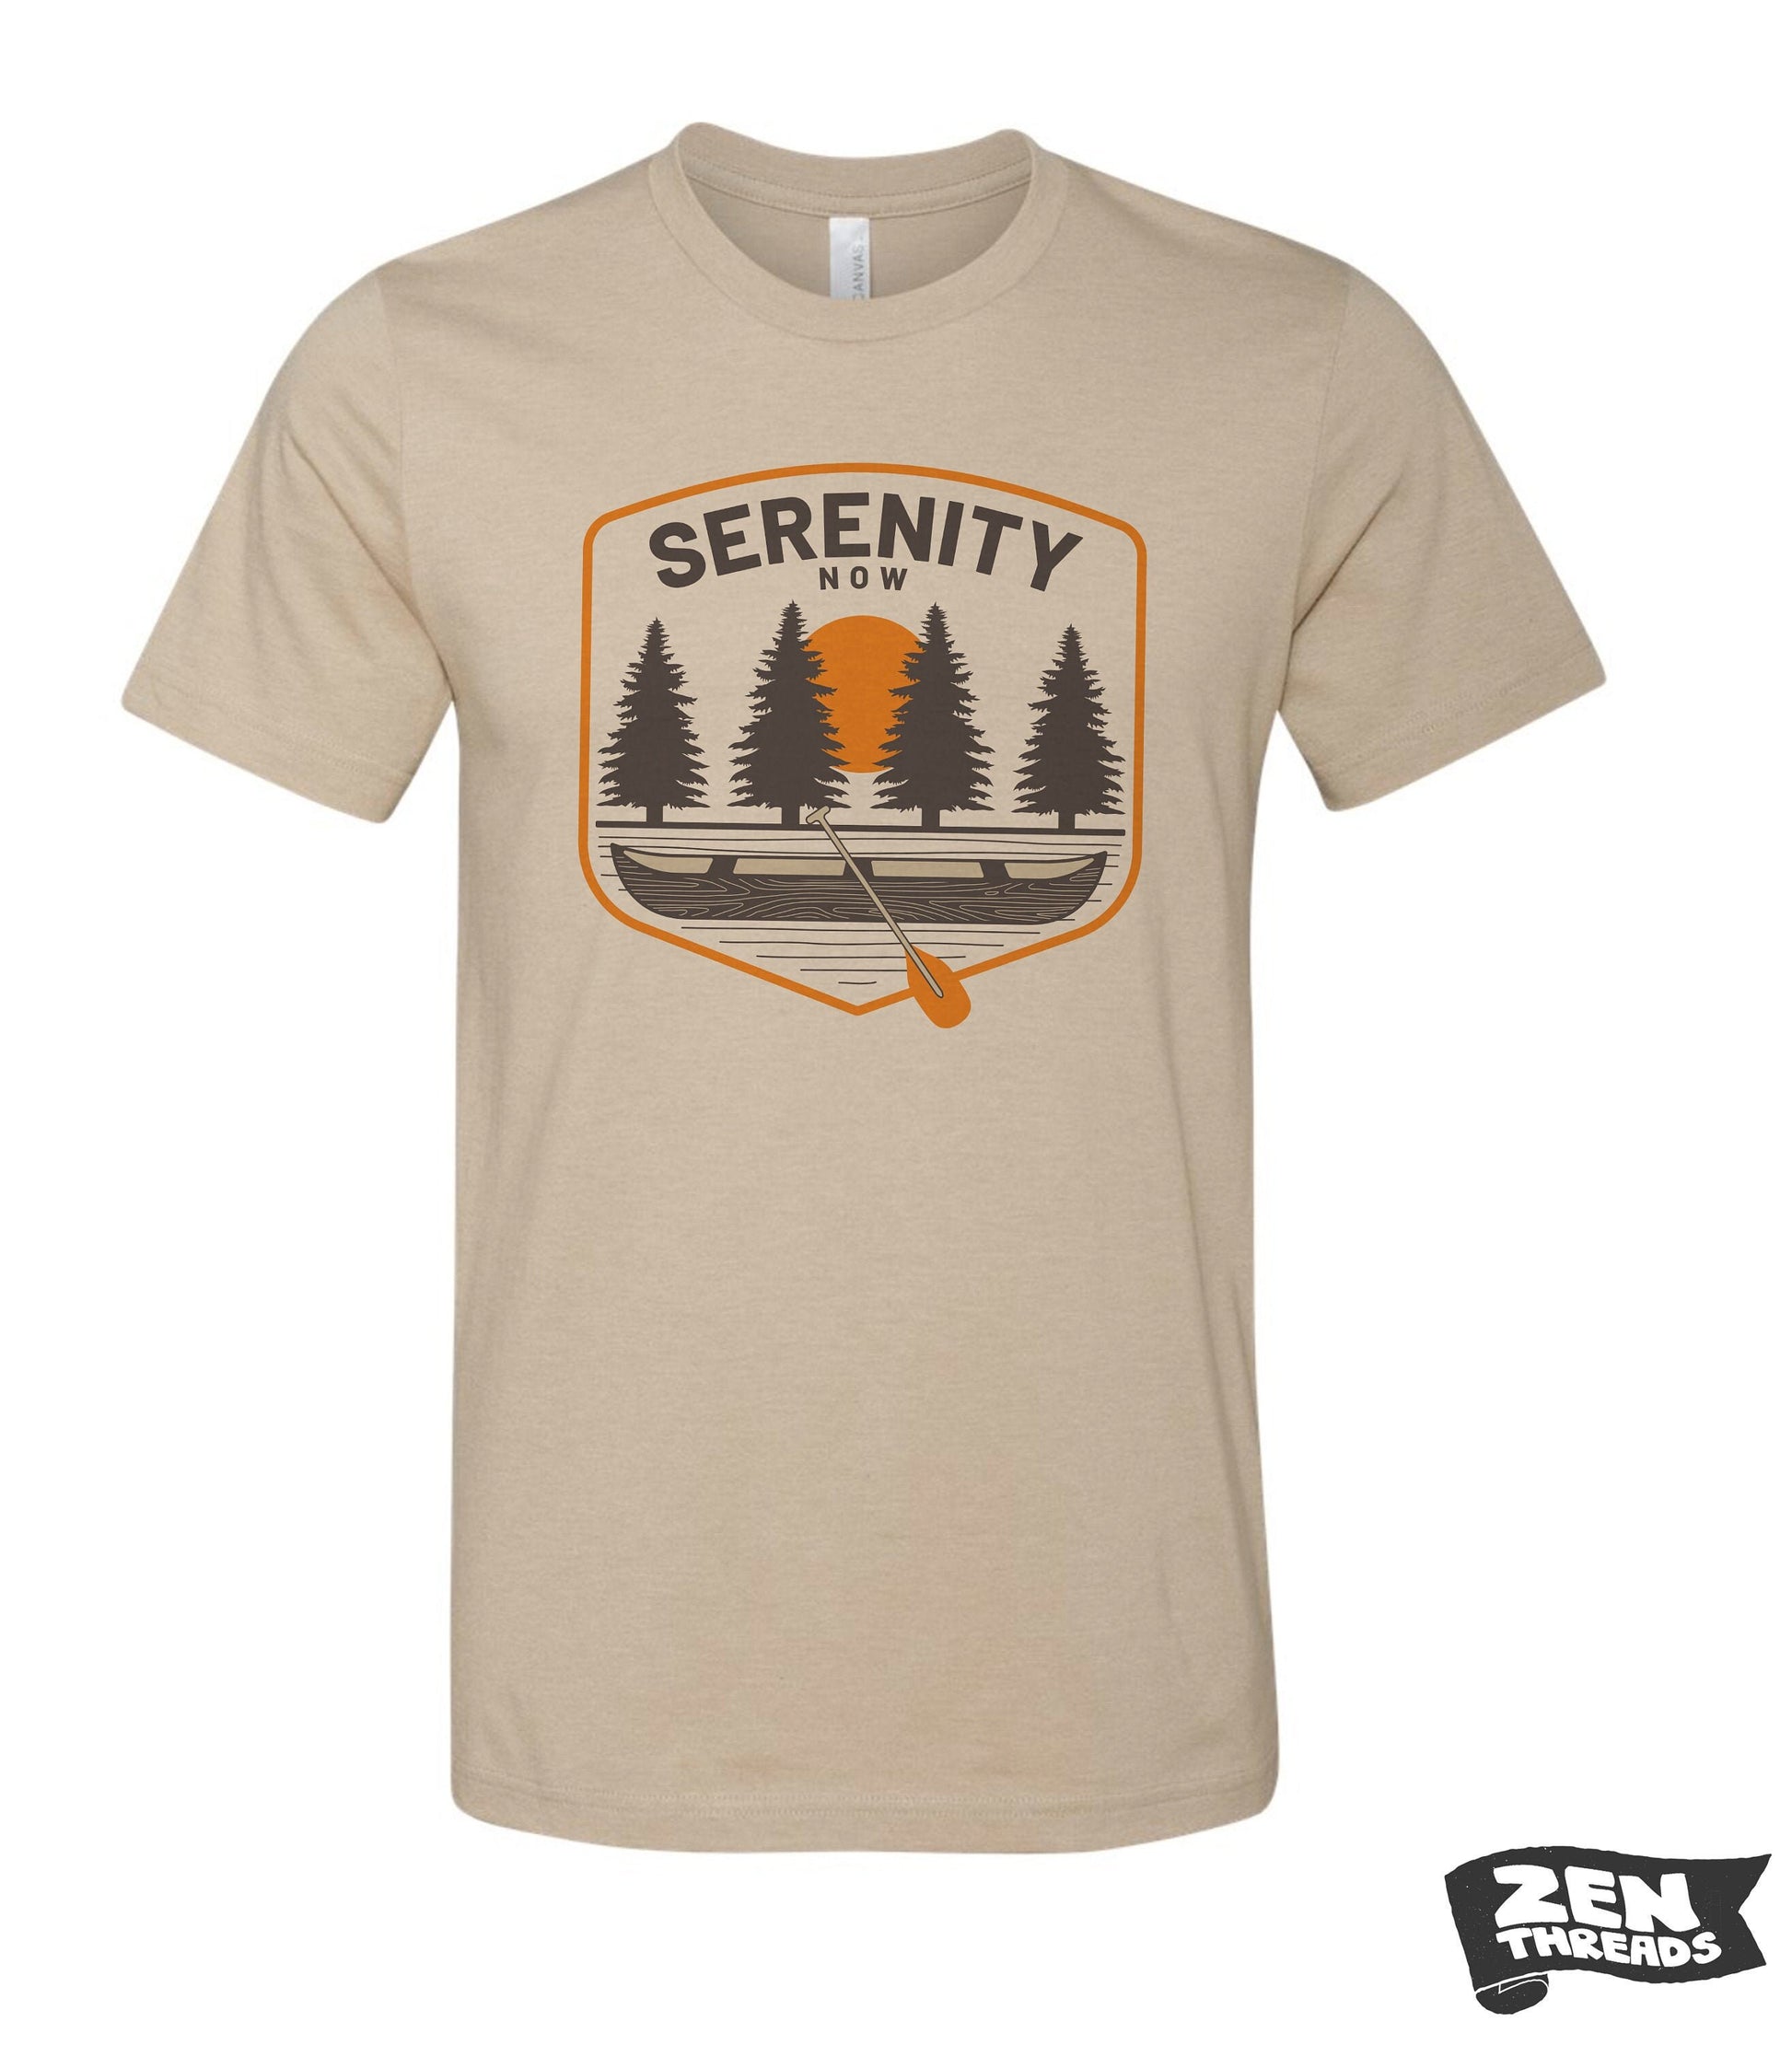 SERENITY NOW Unisex Bella Canvas mens women's t shirt printed custom tee Zen Threads inspiration new mom dad shirt funny quote nature lover